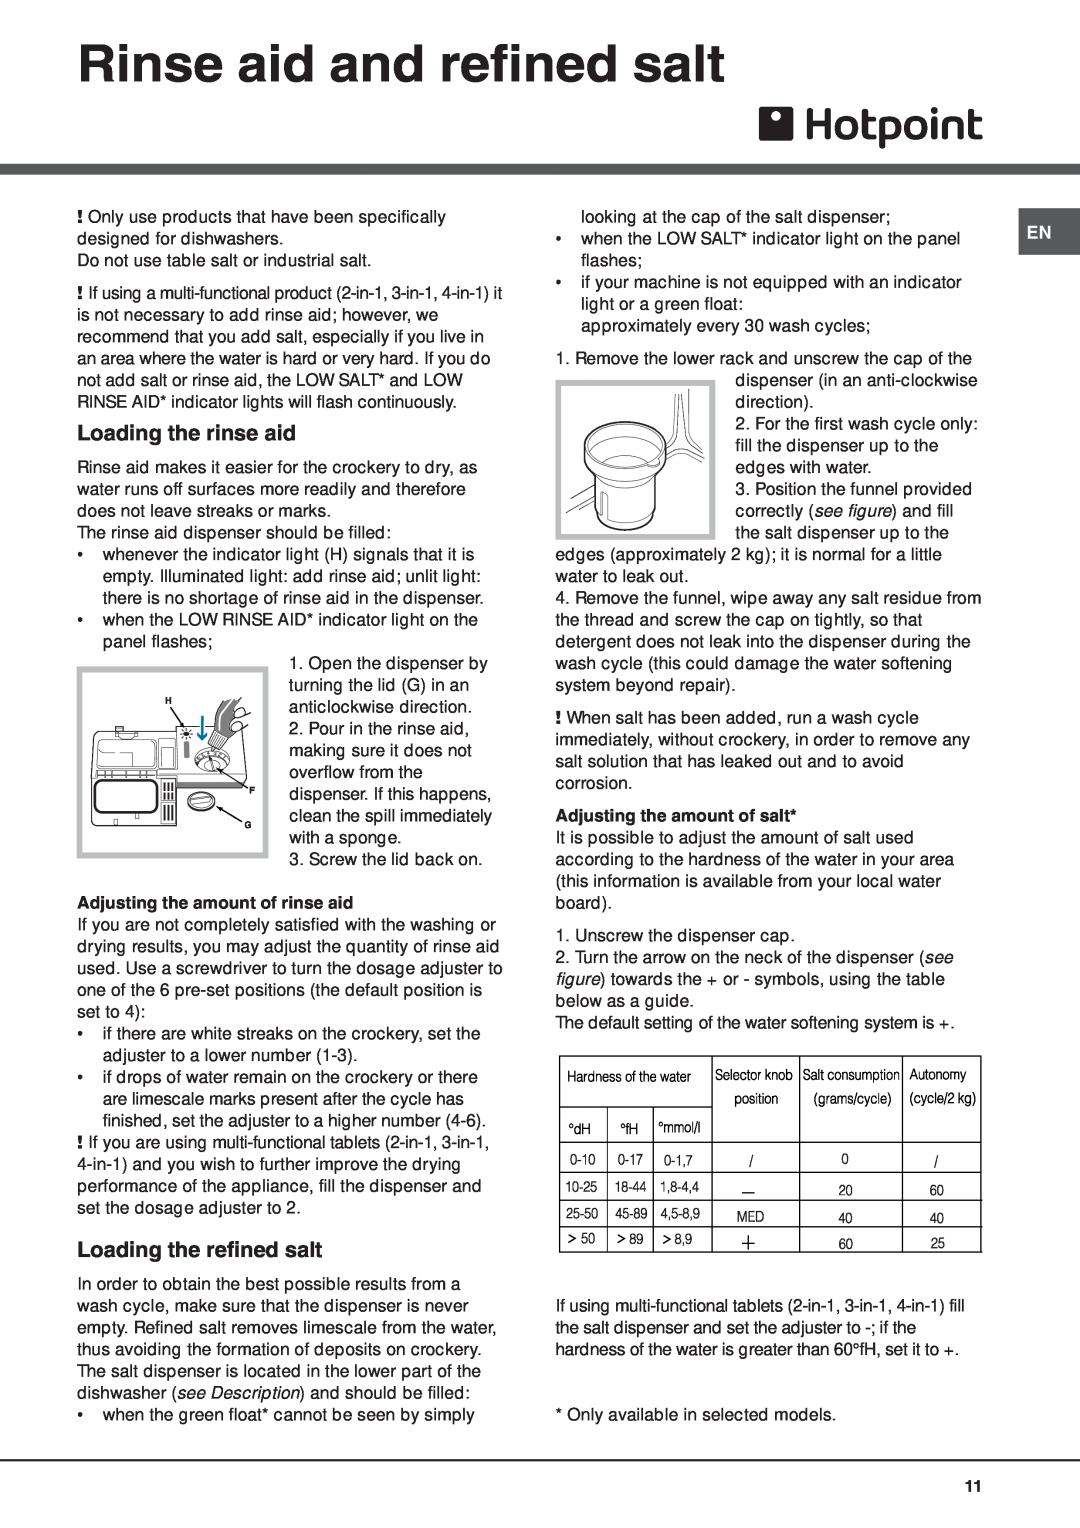 Hotpoint FDW 70 Rinse aid and refined salt, Loading the rinse aid, Loading the refined salt, Adjusting the amount of salt 